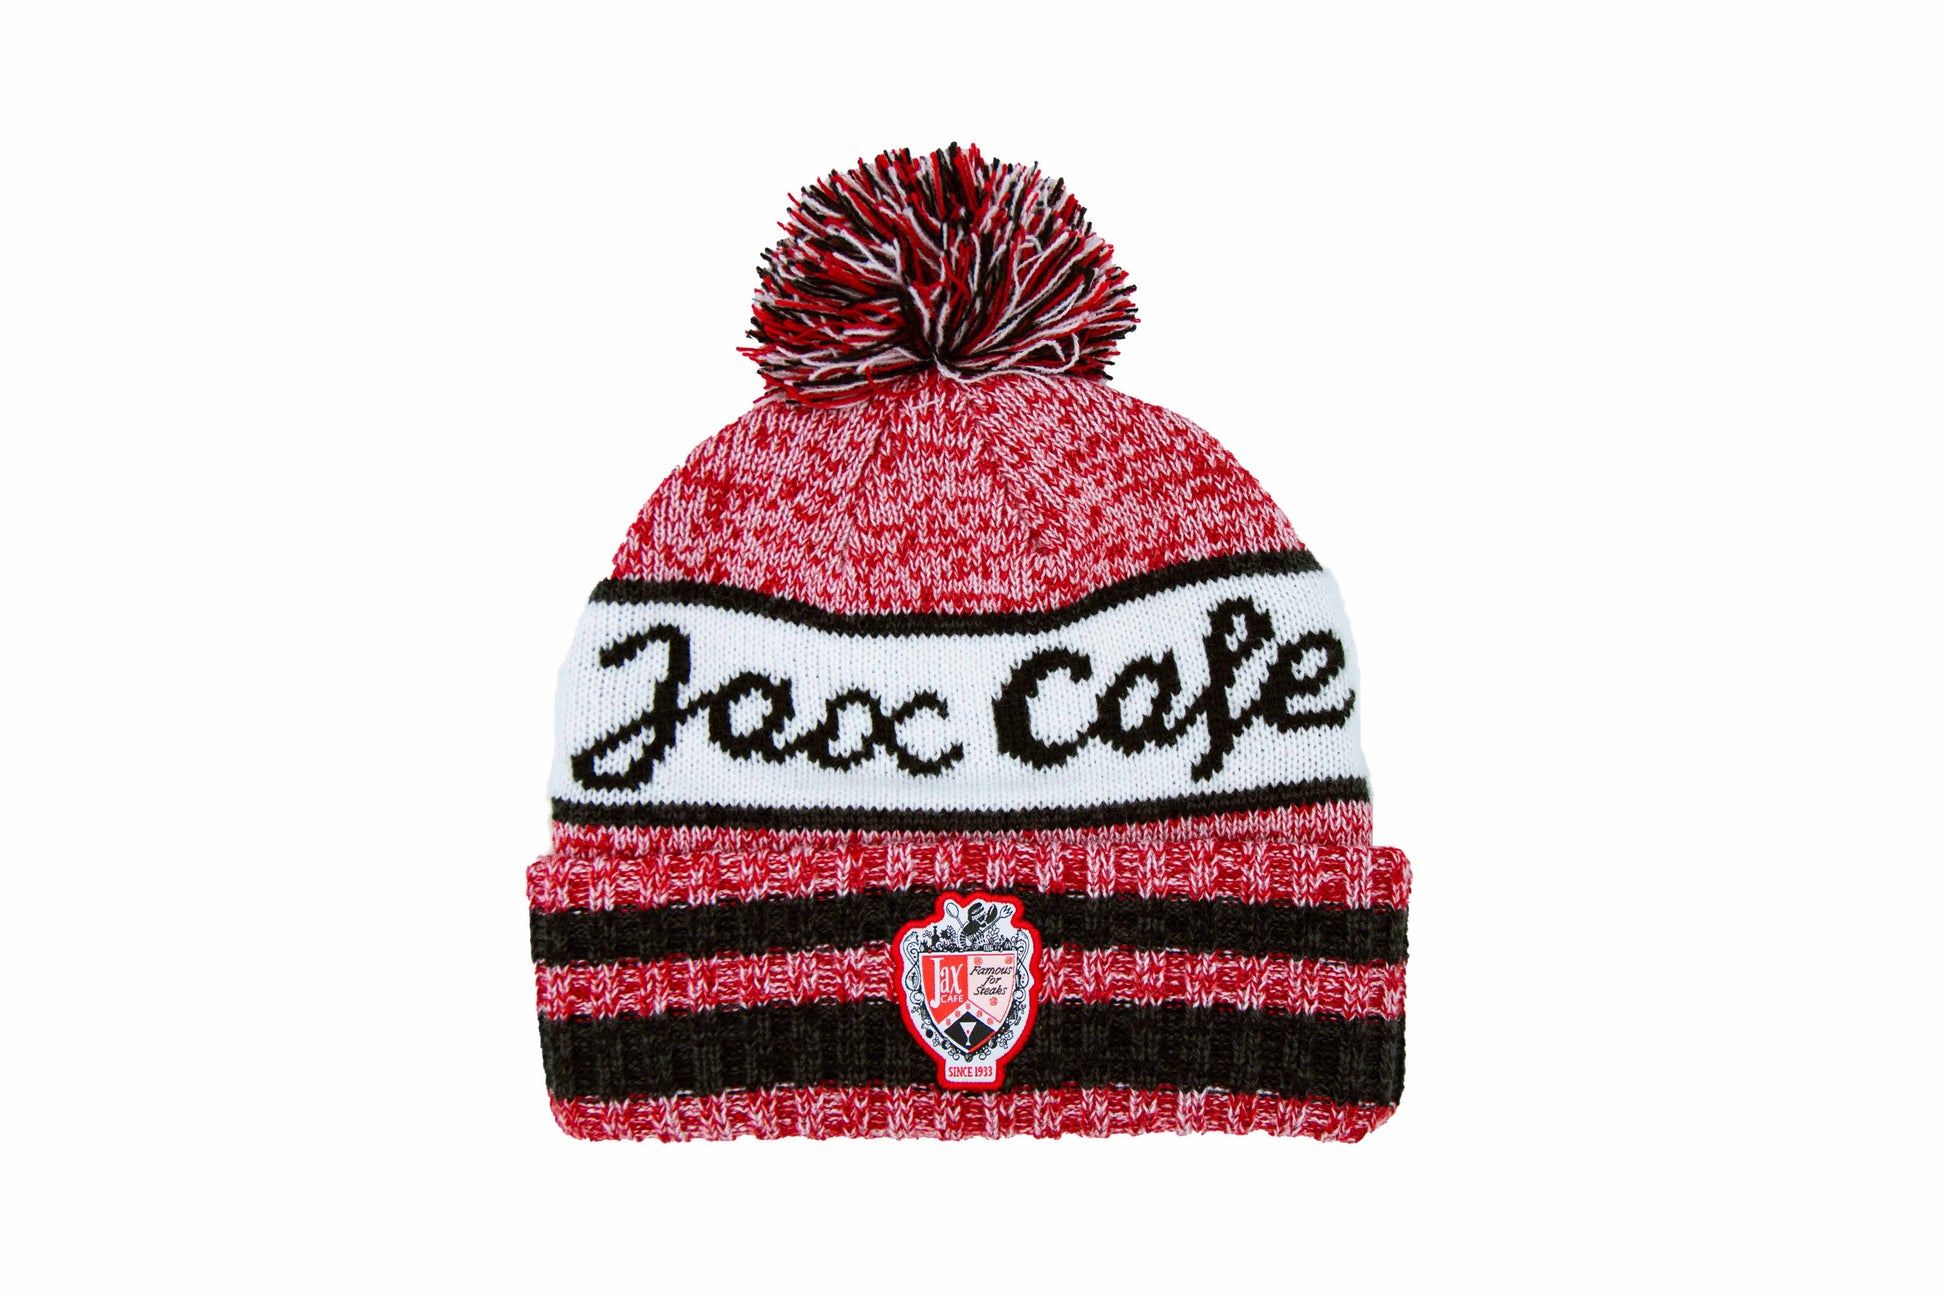 A pom hat with "jax cafe" text written across the hat with the Jax cafe logo below